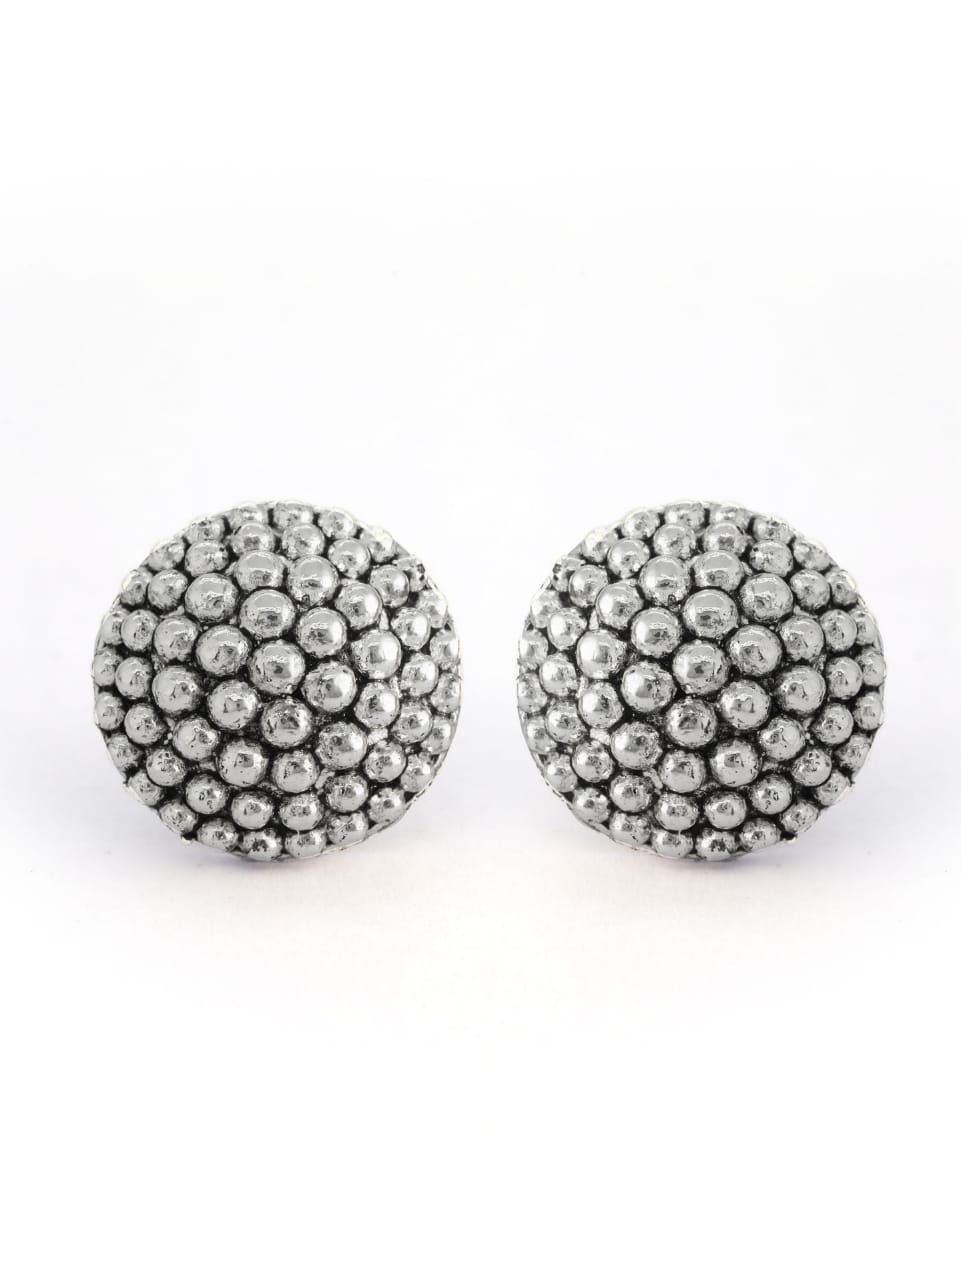 Fashion Latest  Sterlin   Designer Silver  Earrings  Tops for Women and Girls